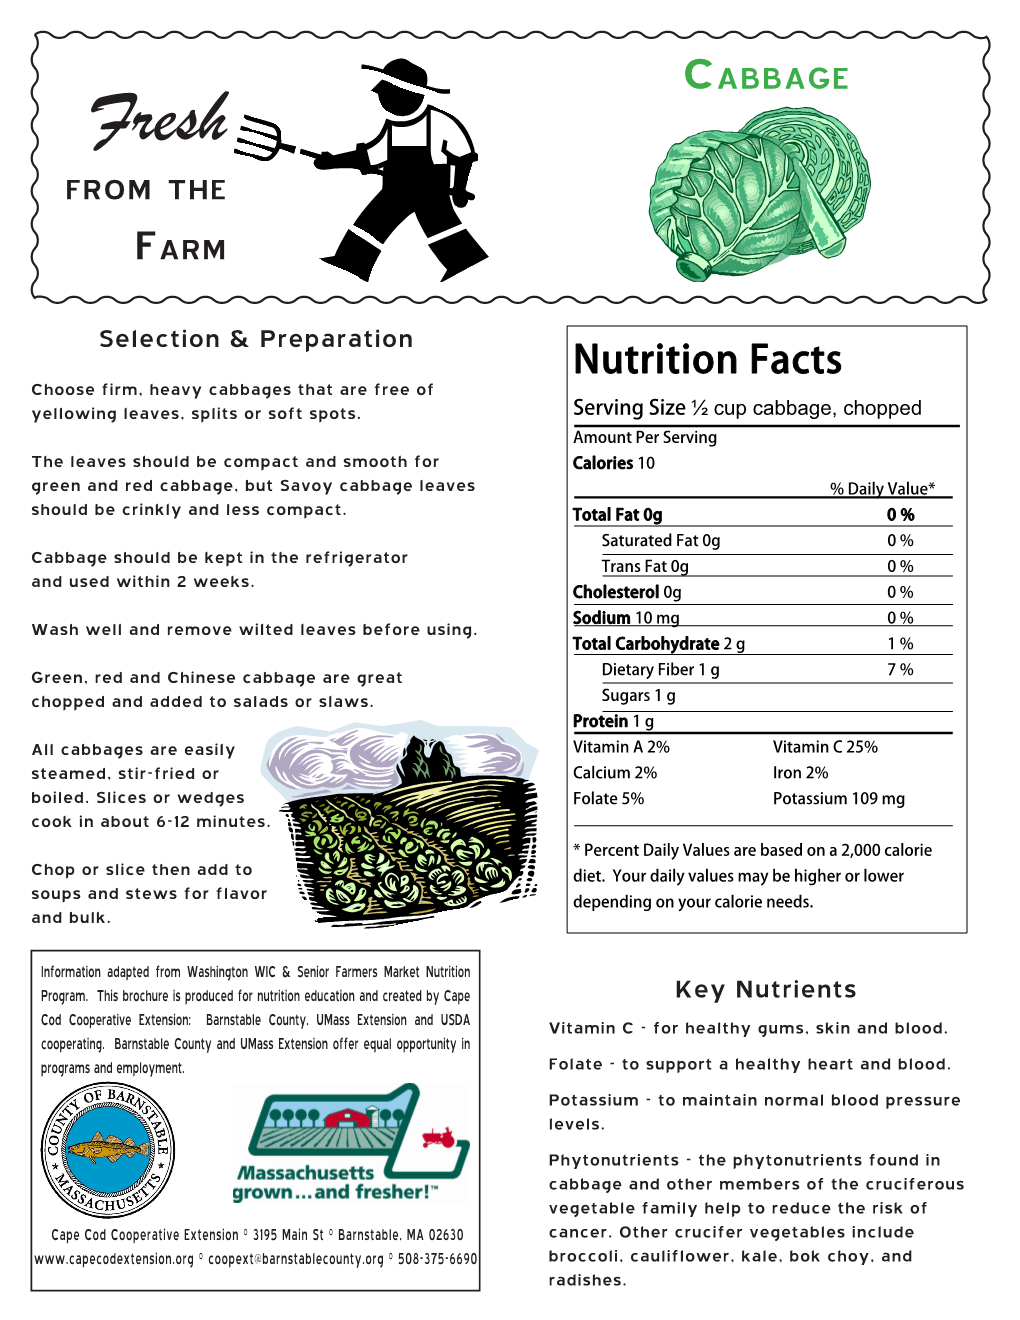 Nutrition Facts Choose Firm, Heavy Cabbages That Are Free of Yellowing Leaves, Splits Or Soft Spots